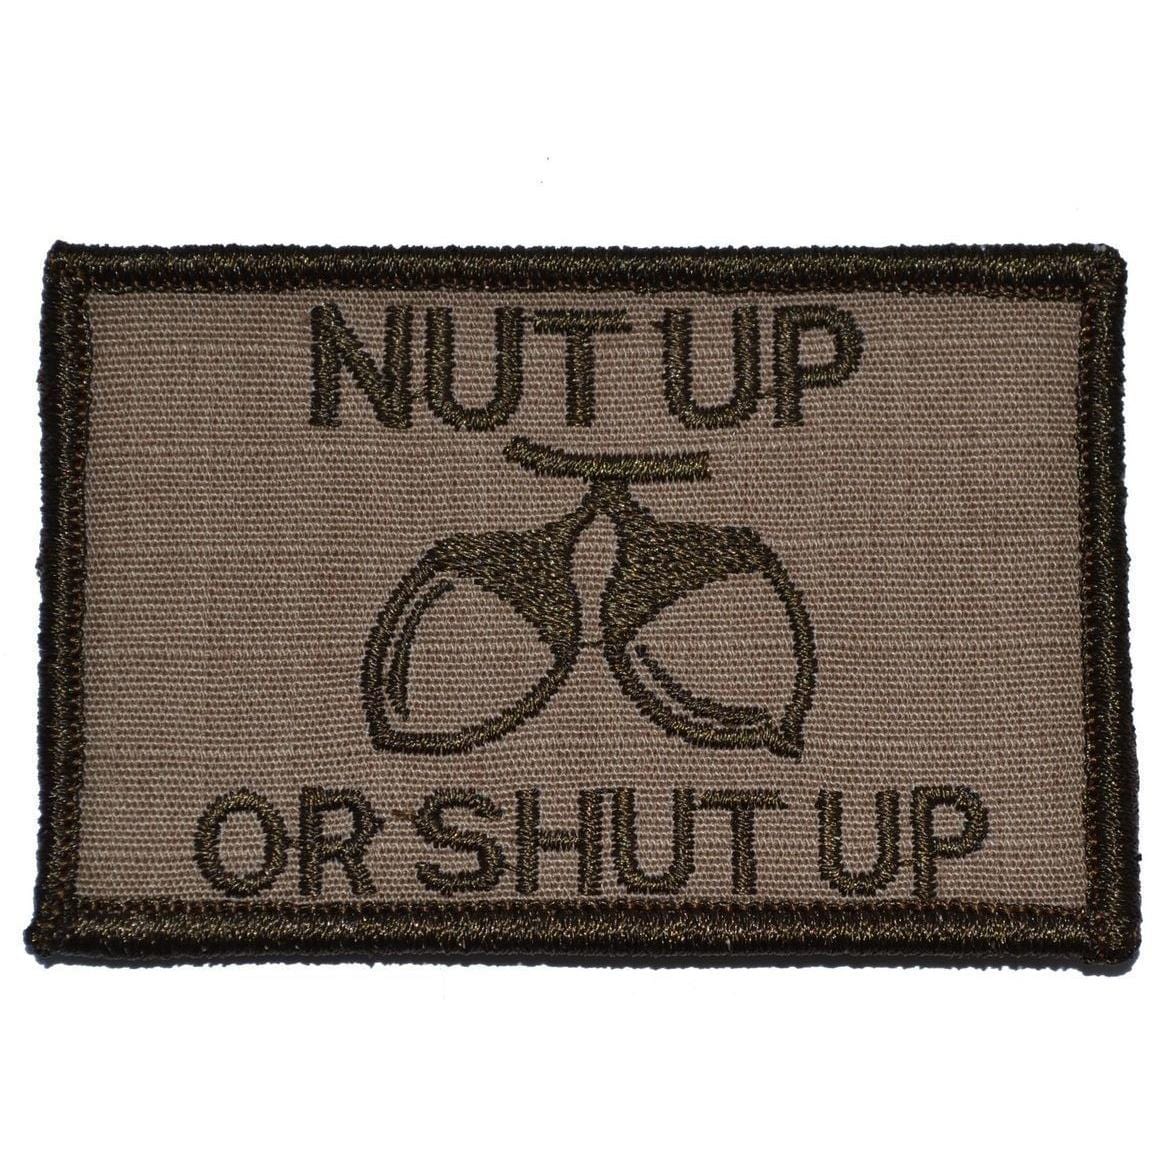 Tactical Gear Junkie Patches Coyote Brown Nut Up or Shut Up - 2x3 Patch